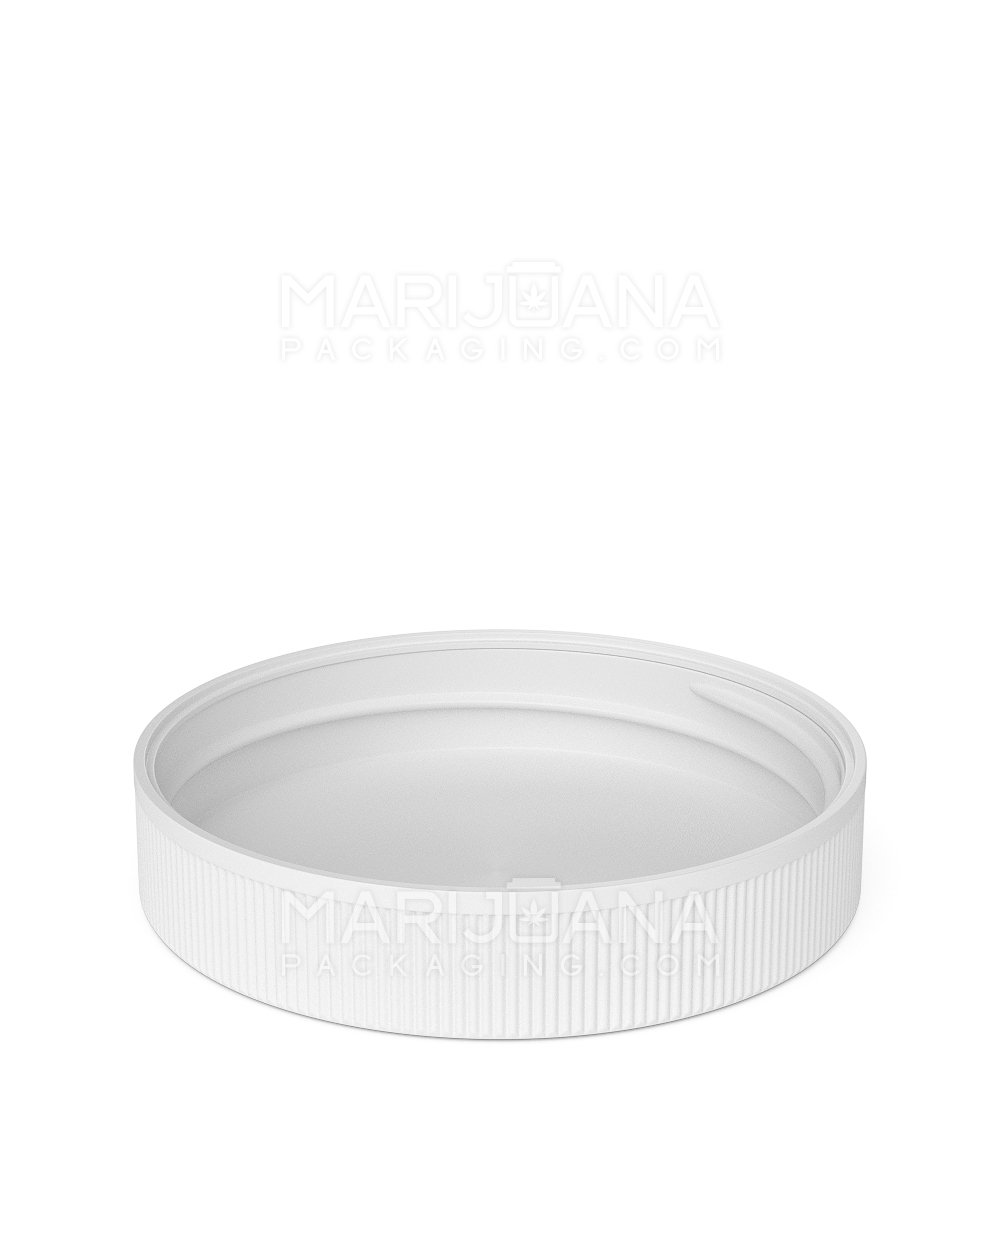 Child Resistant | Ribbed Push Down & Turn Plastic Caps | 89mm - Semi Gloss White - 205 Count - 4